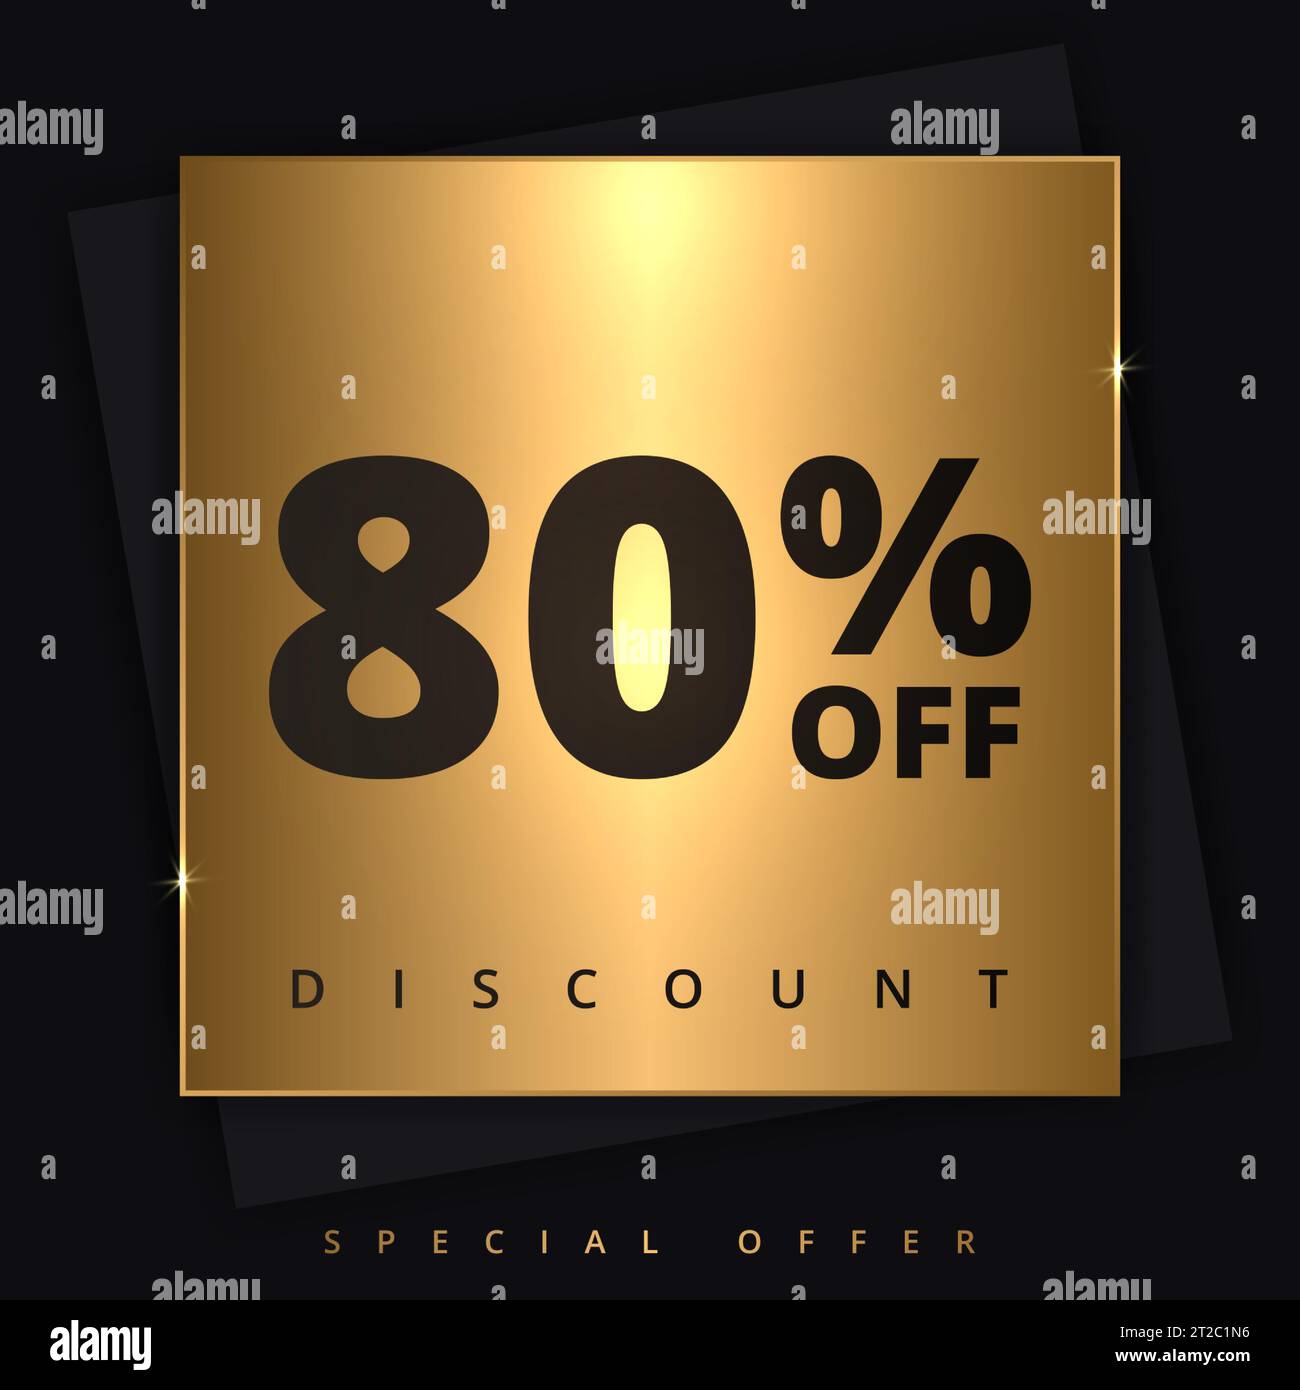 80 off discount banner. Special offer sale 80 percent off. Sale discount offer. Luxury promotion banner eighty percent discount in golden square and Stock Vector